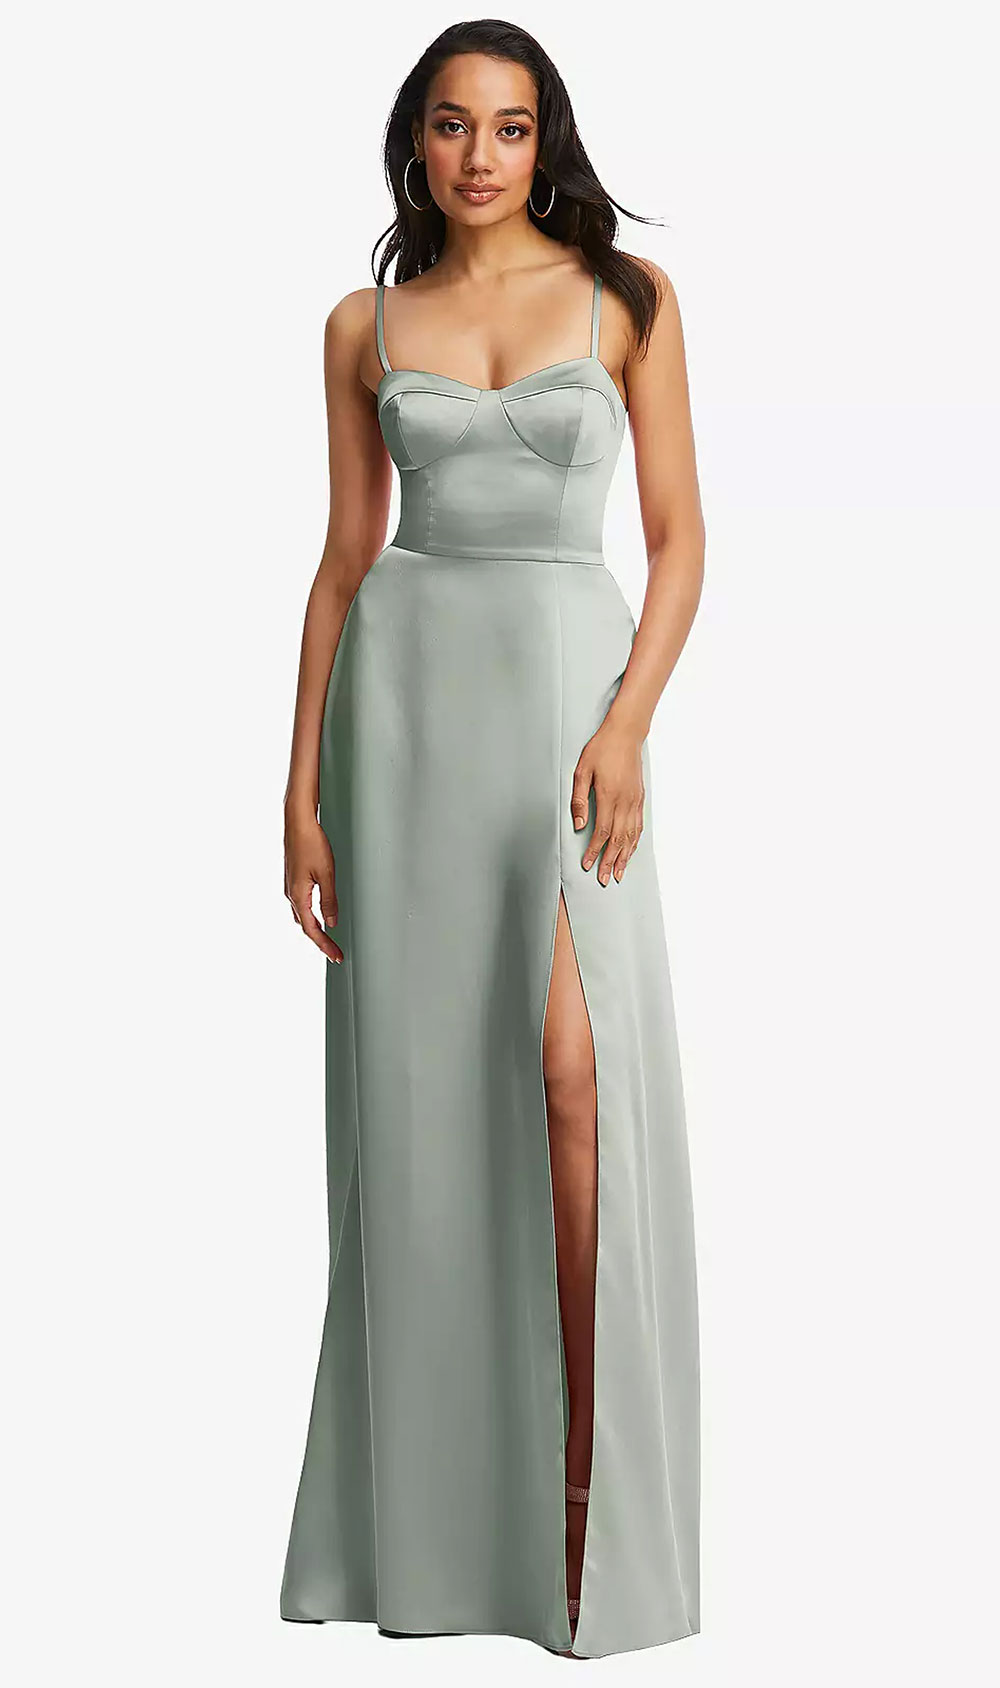 sage green bridesmaid dress with bustier